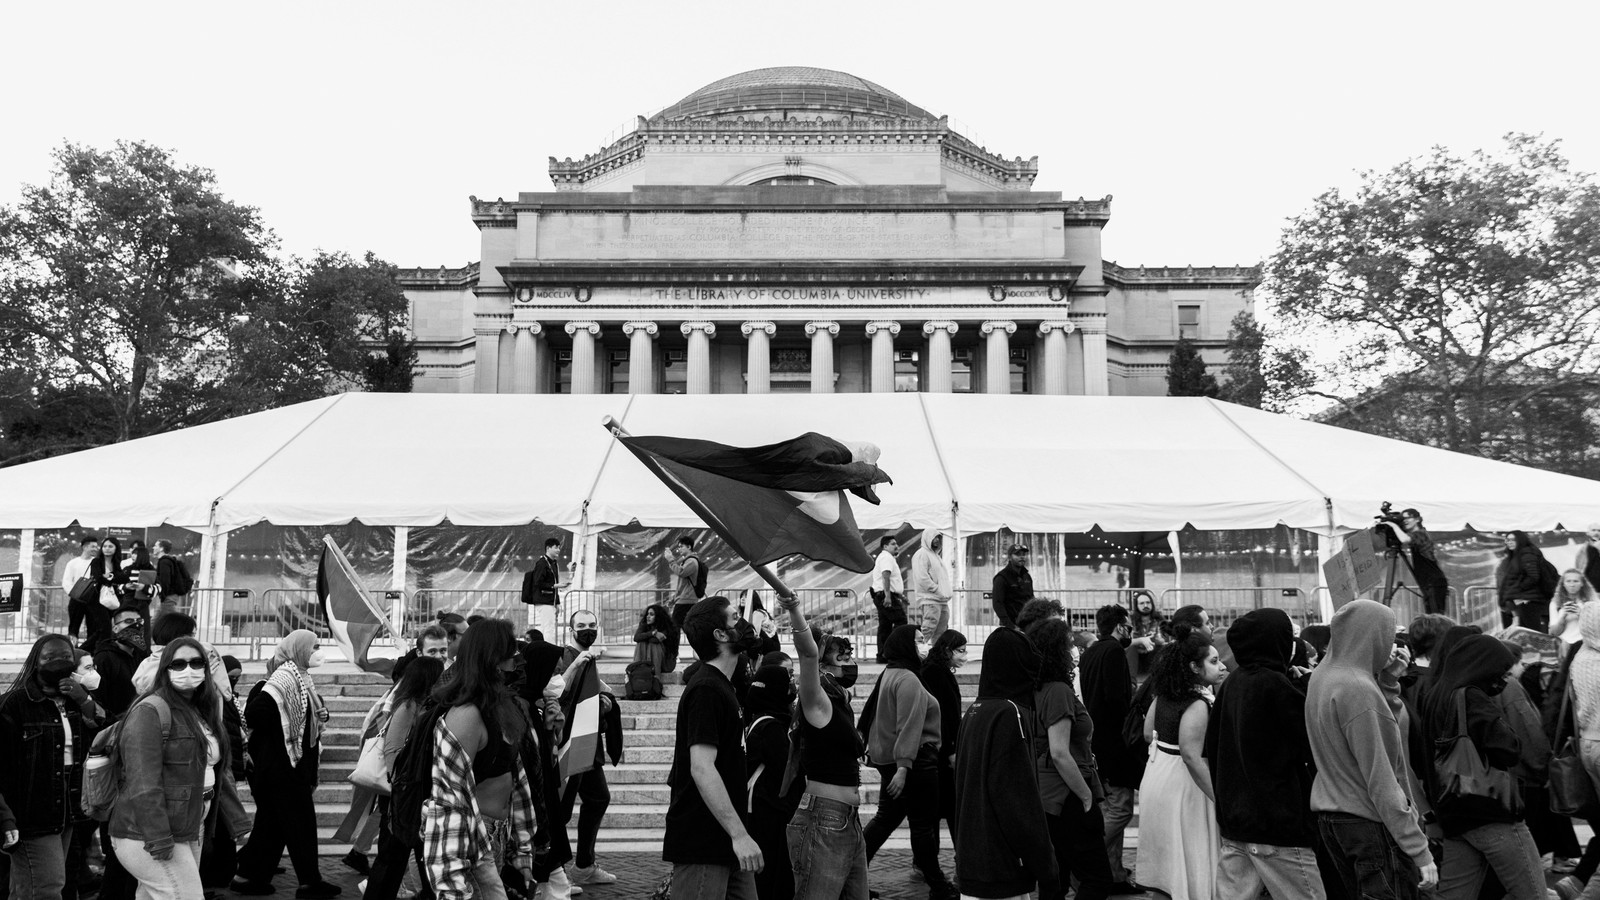 As a Columbia Grad, I Oppose This Latest On-Campus Activism